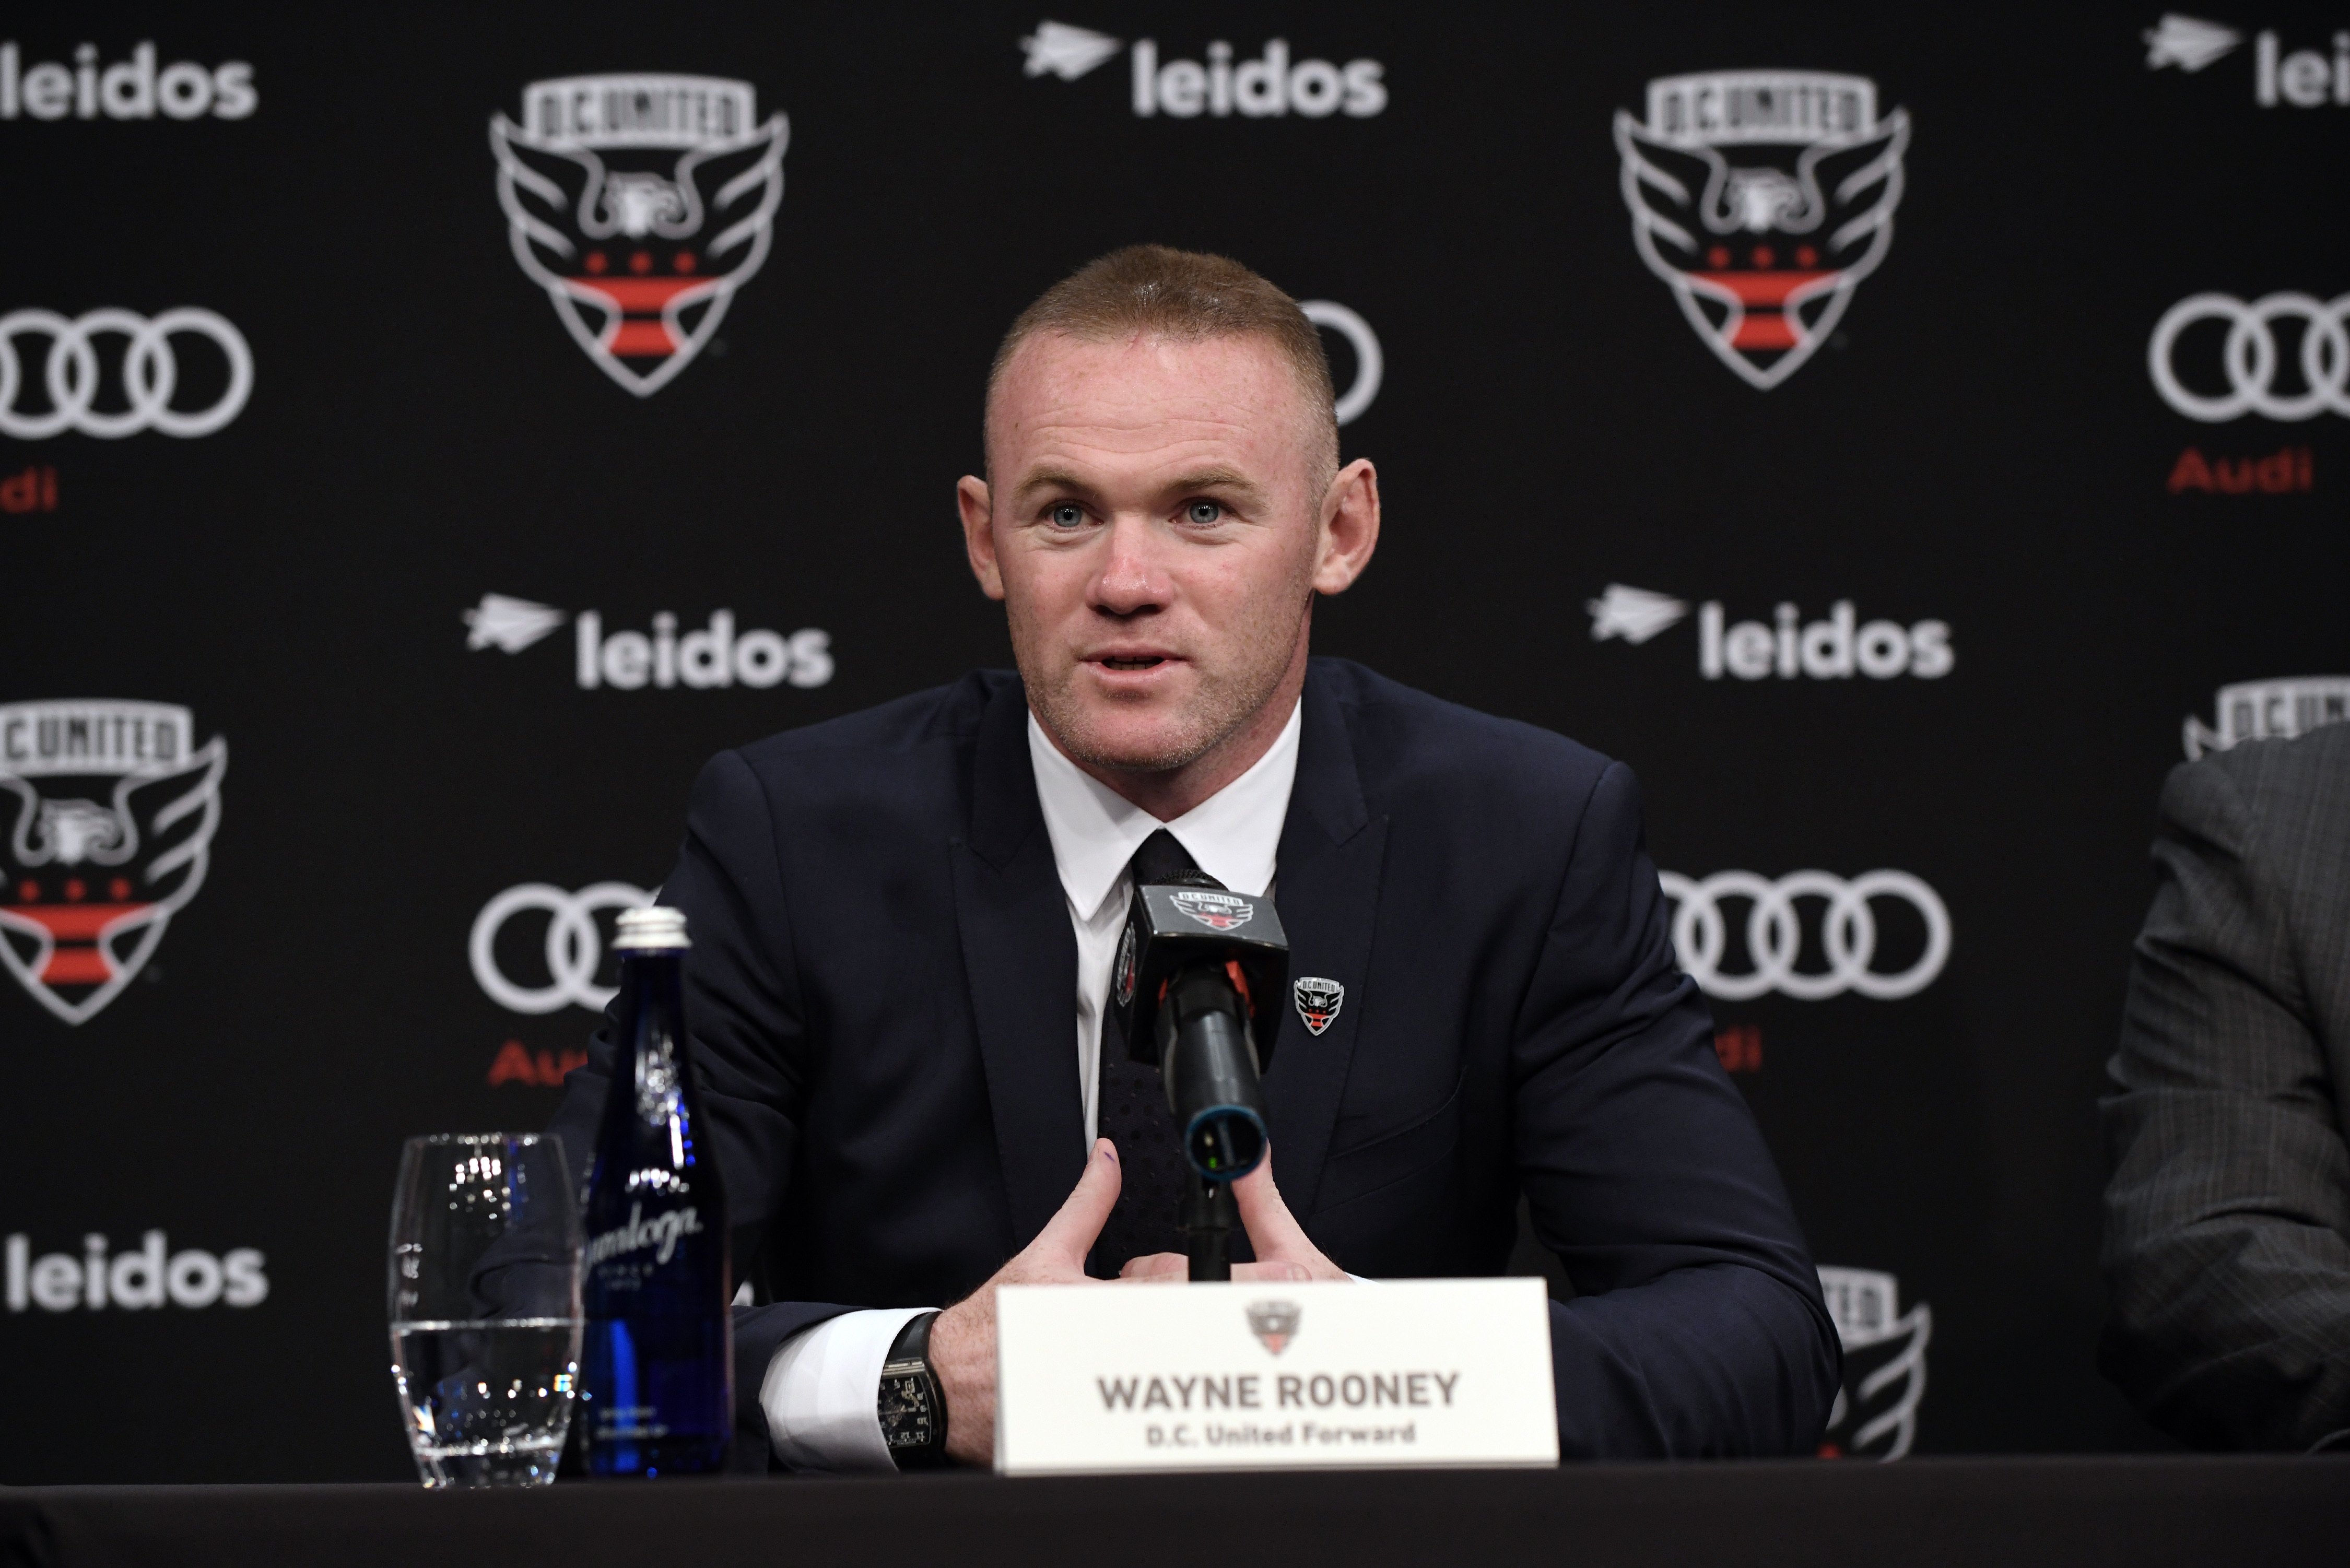 Wayne Rooney is unveiled at DC United